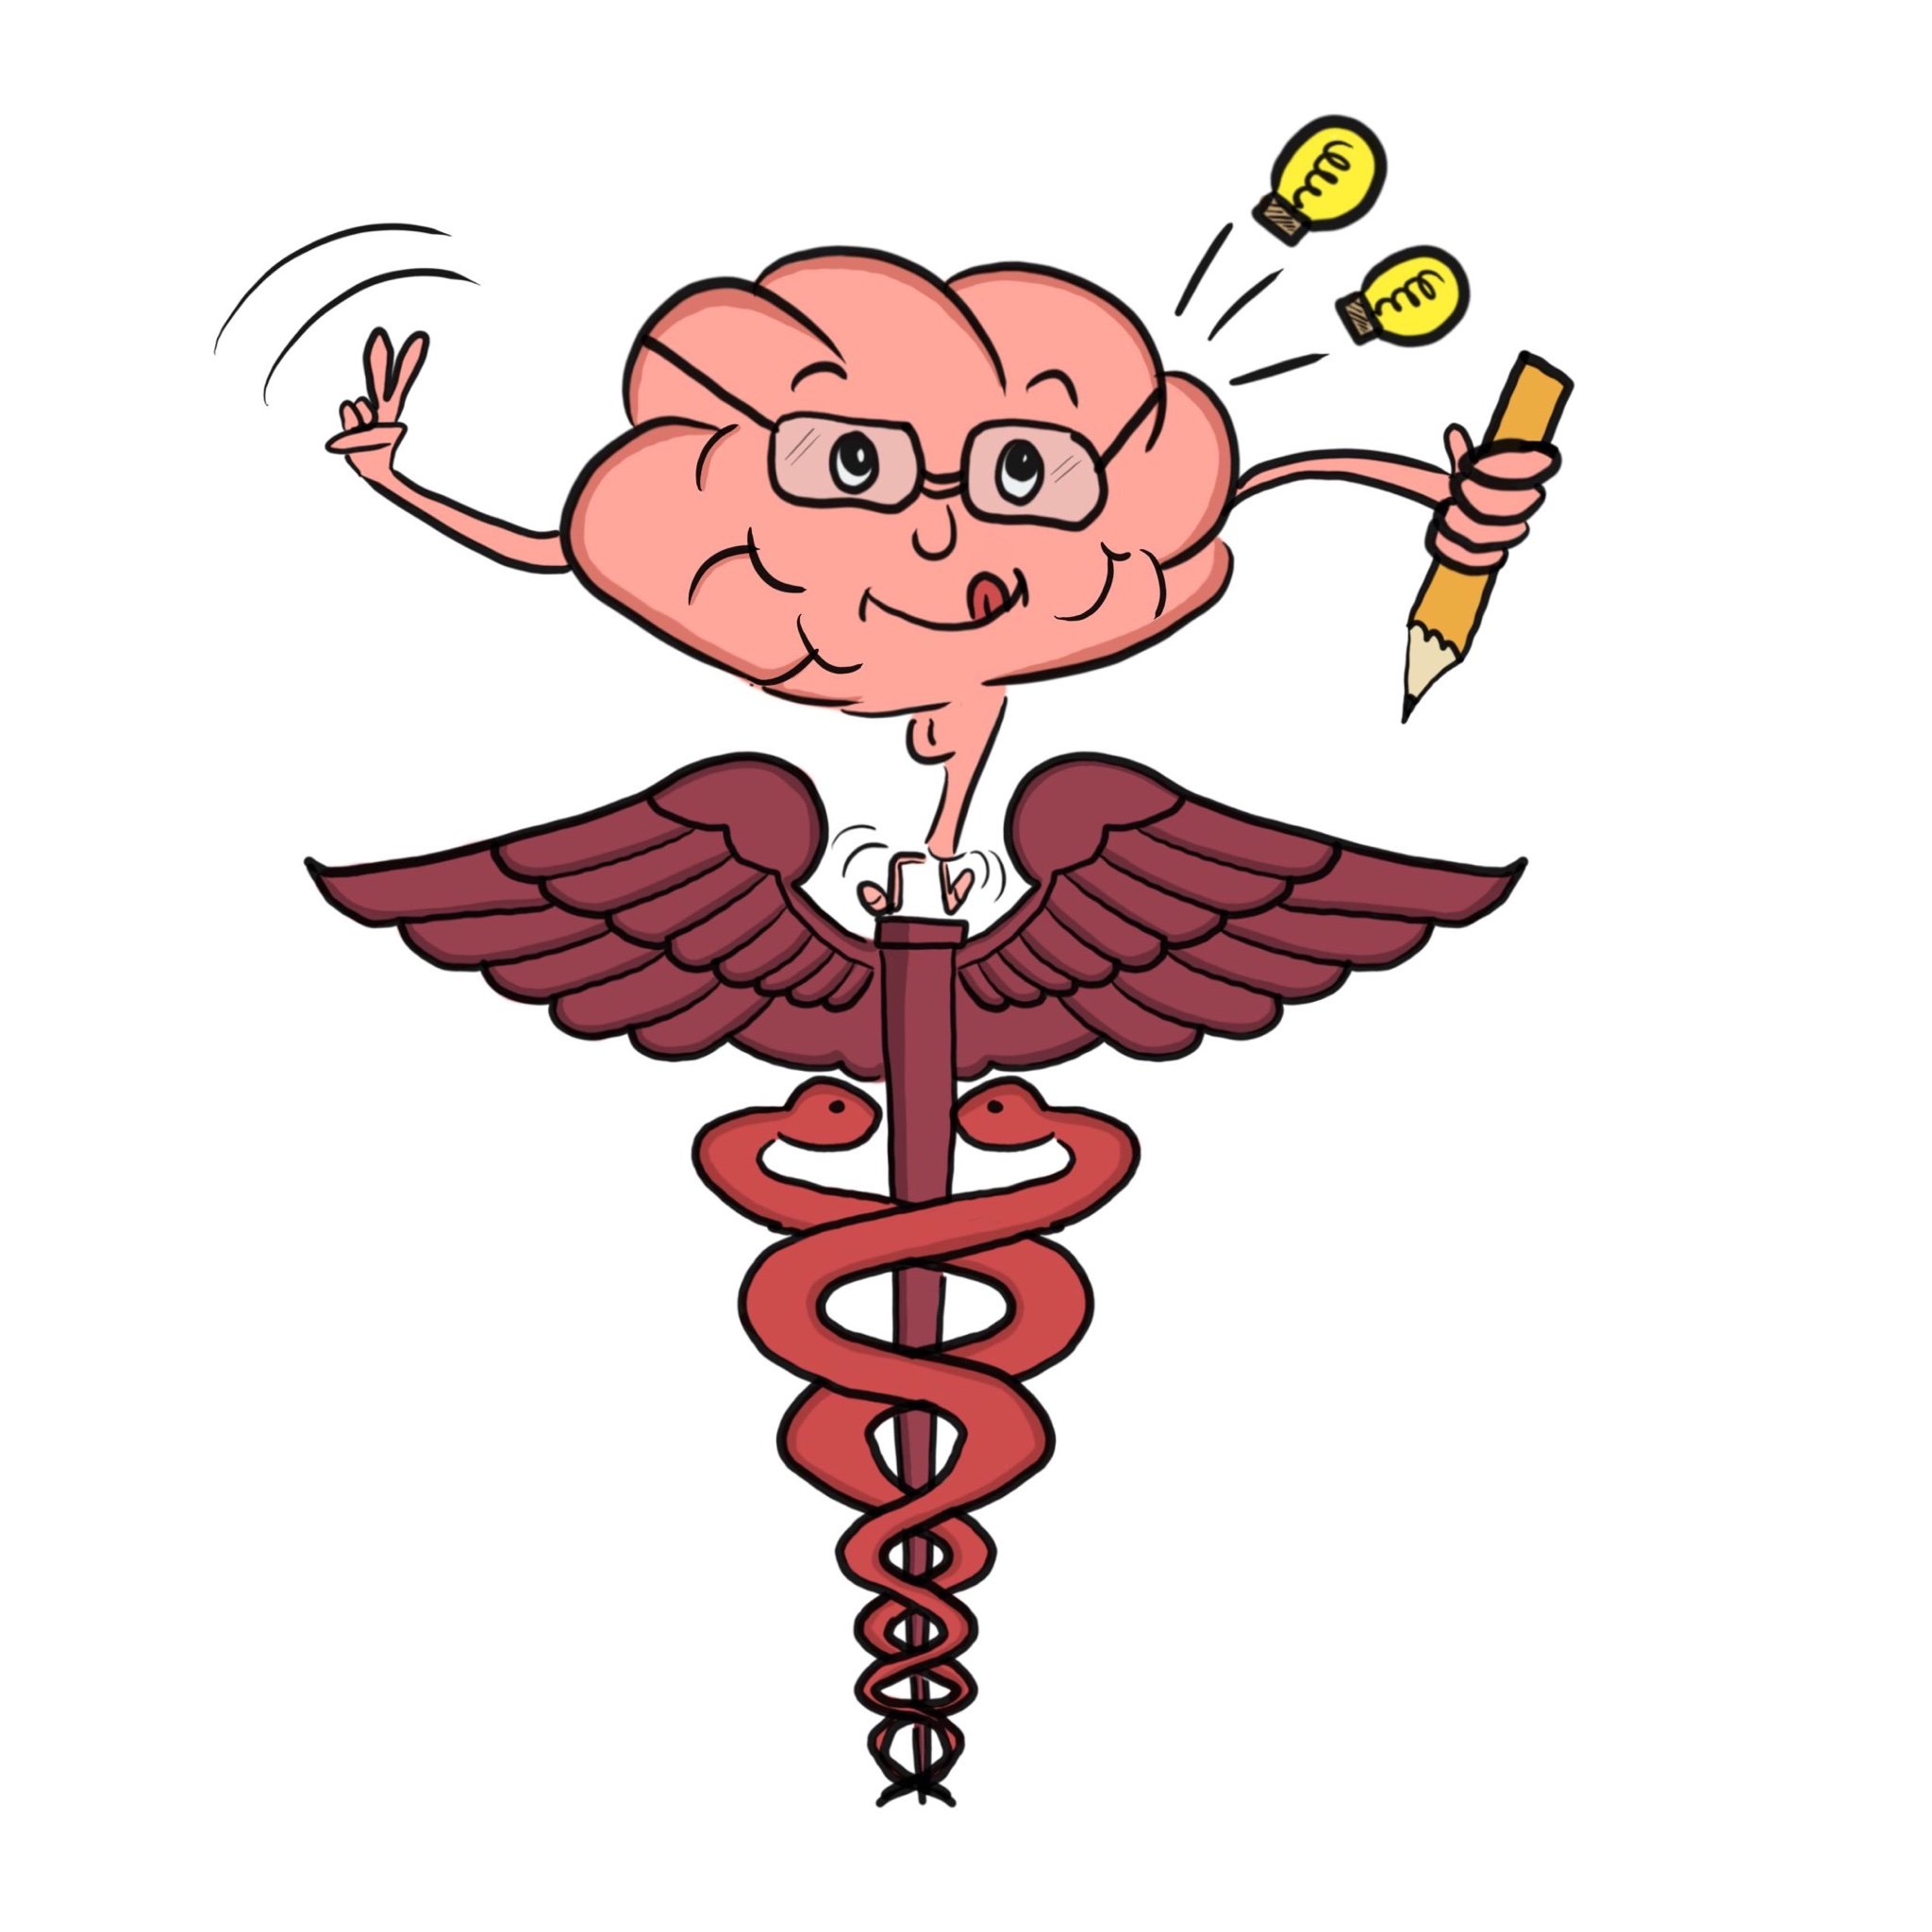 Increasing visual memory and fun in medicine by creating engaging visual art, comics and cartoons #Meded #usmle #FOAMed, https://t.co/Vtkep6z41m